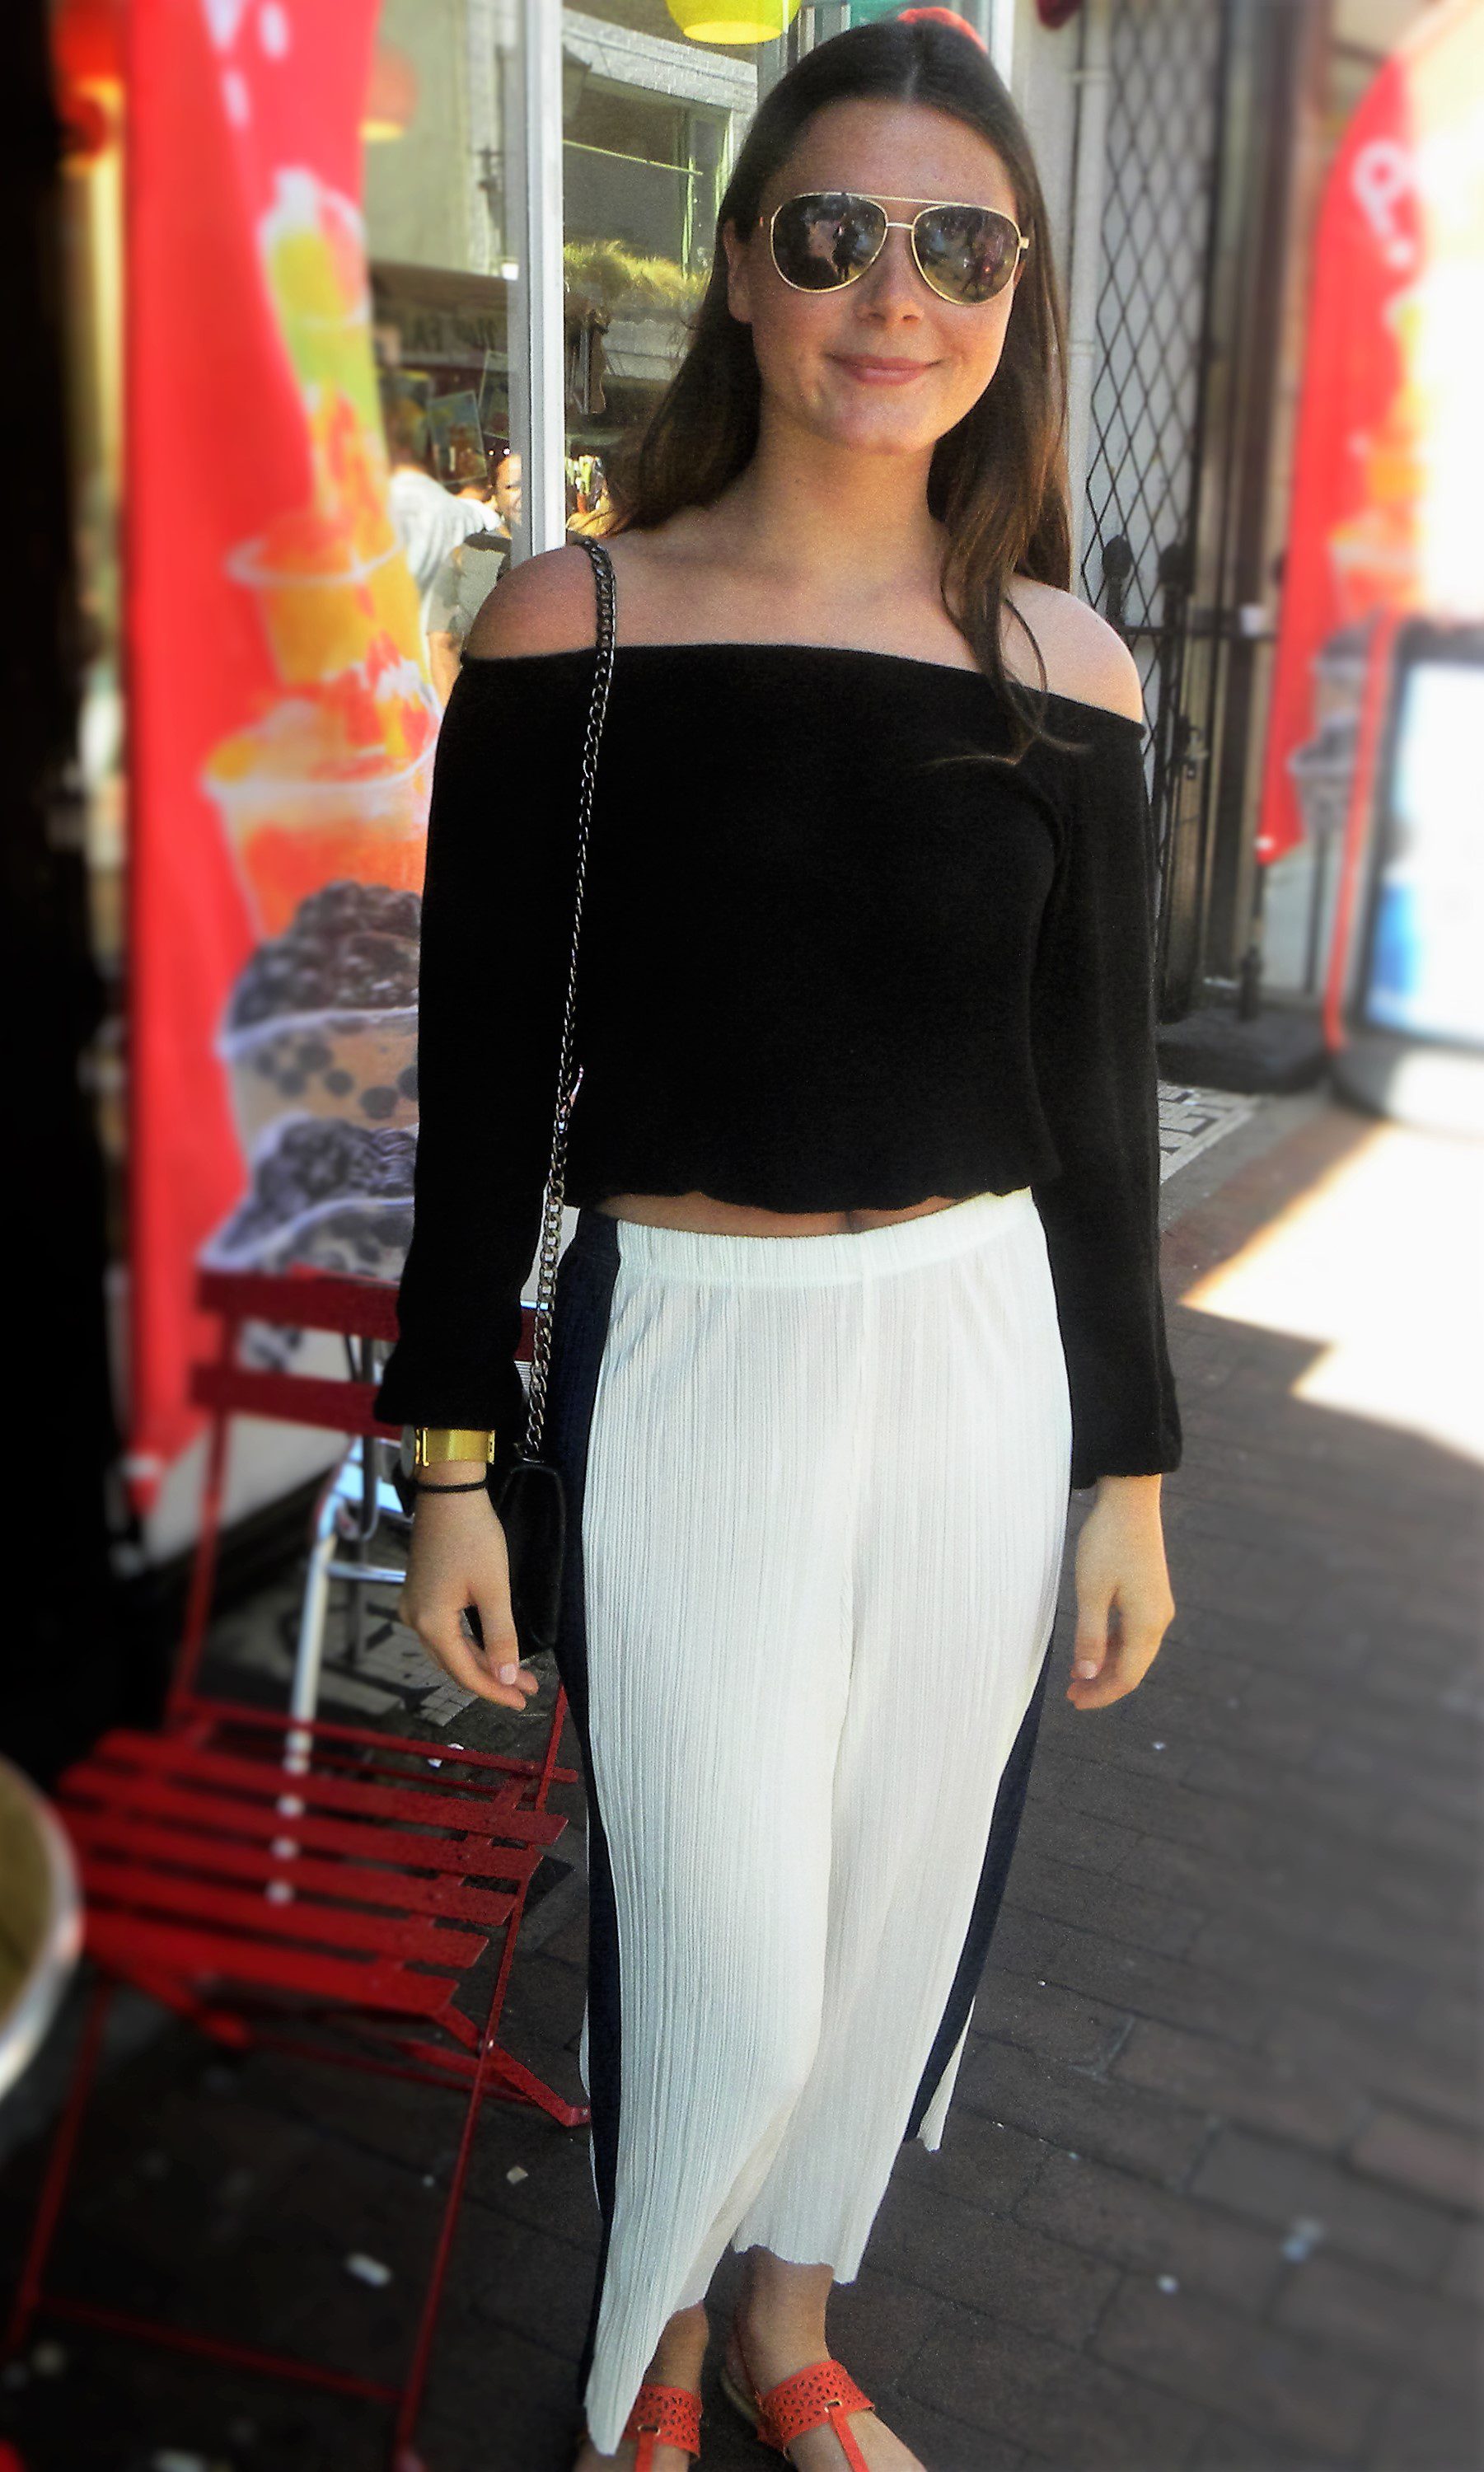 Isabel is wearing sunglasses from Timbaland, top from Brandy Melville and trousers from Top Shop.